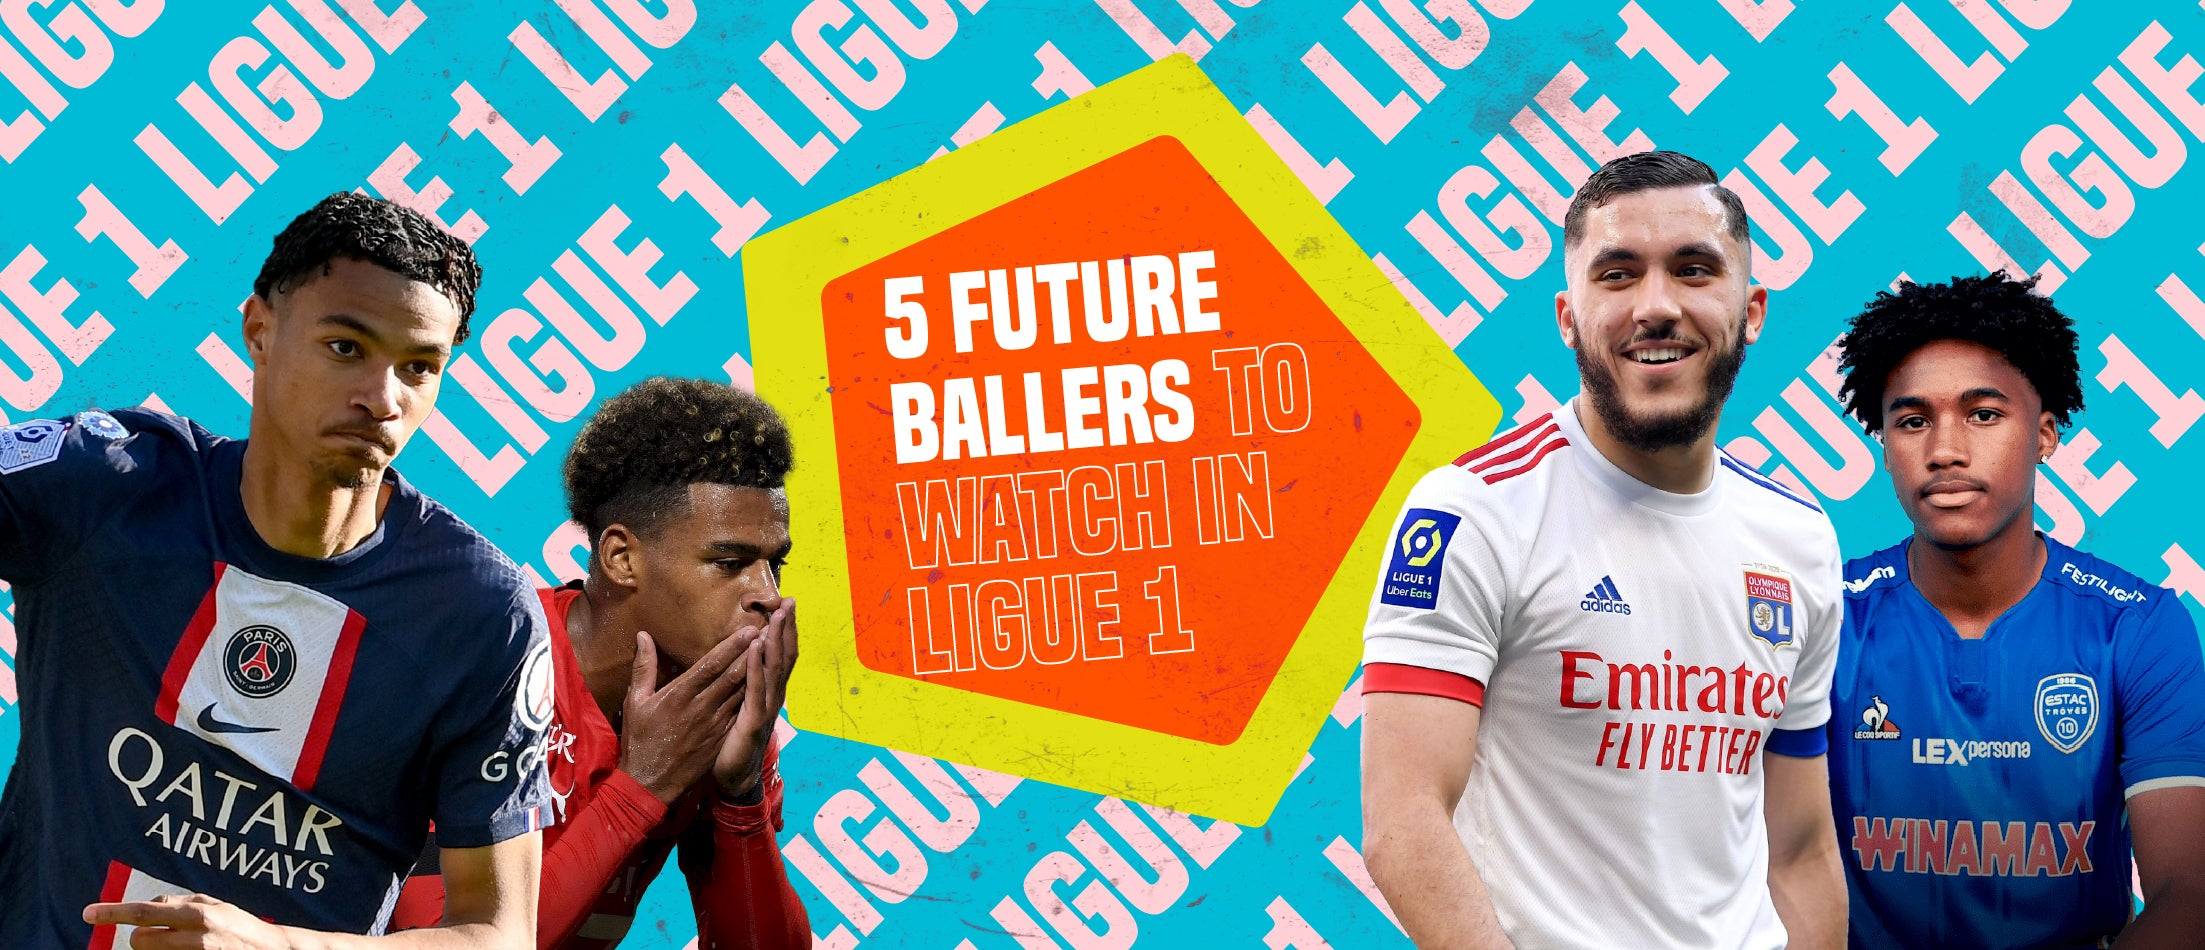 Ligue 1 Future Ballers